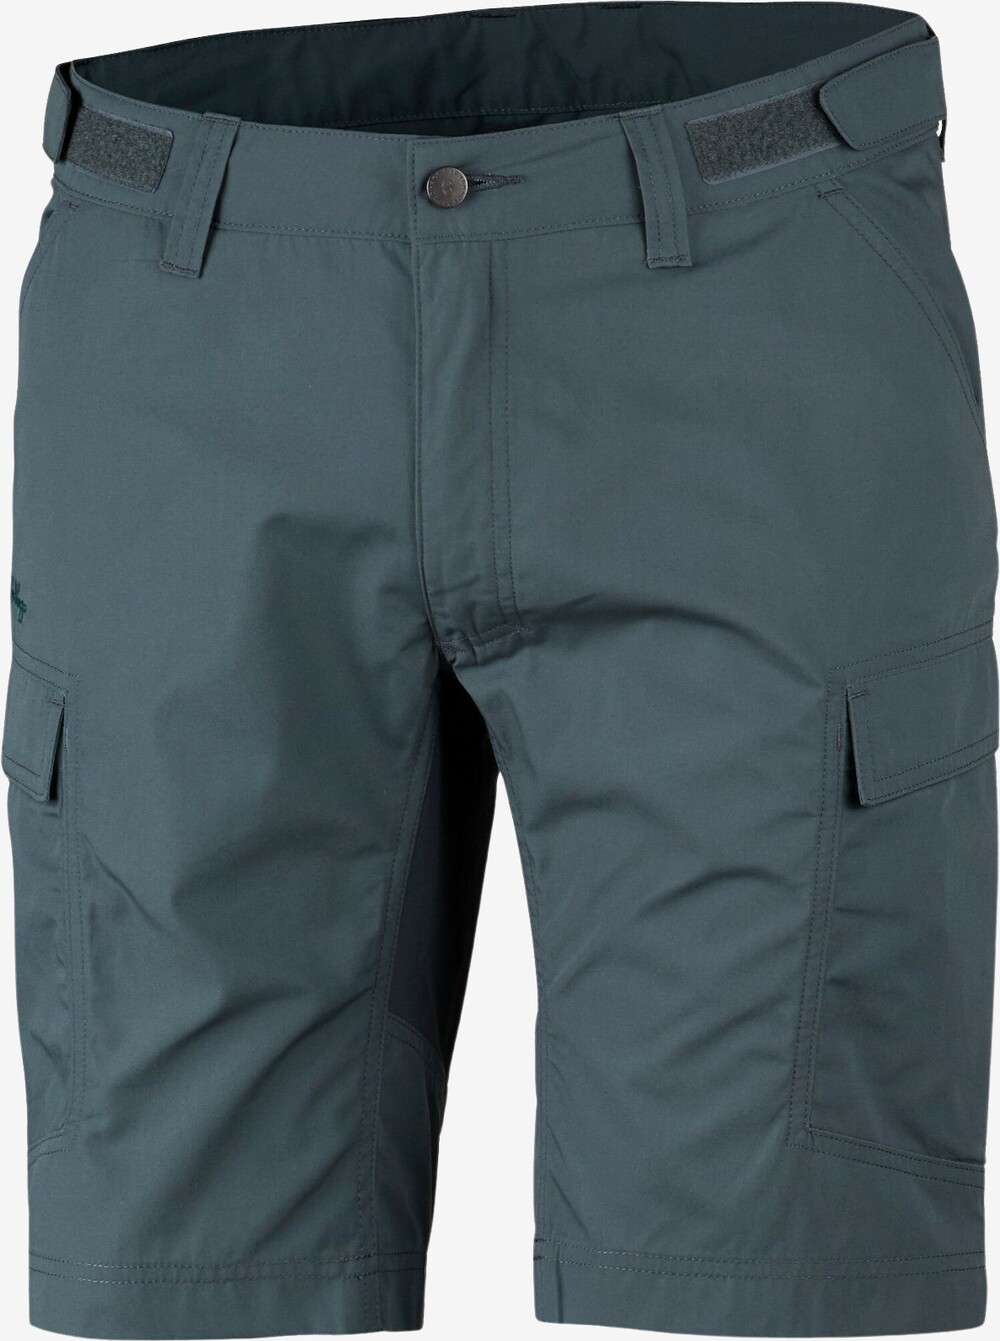 Lundhags - Vanner Ms Shorts (Dk Agave/Seaweed) - 52 (L)